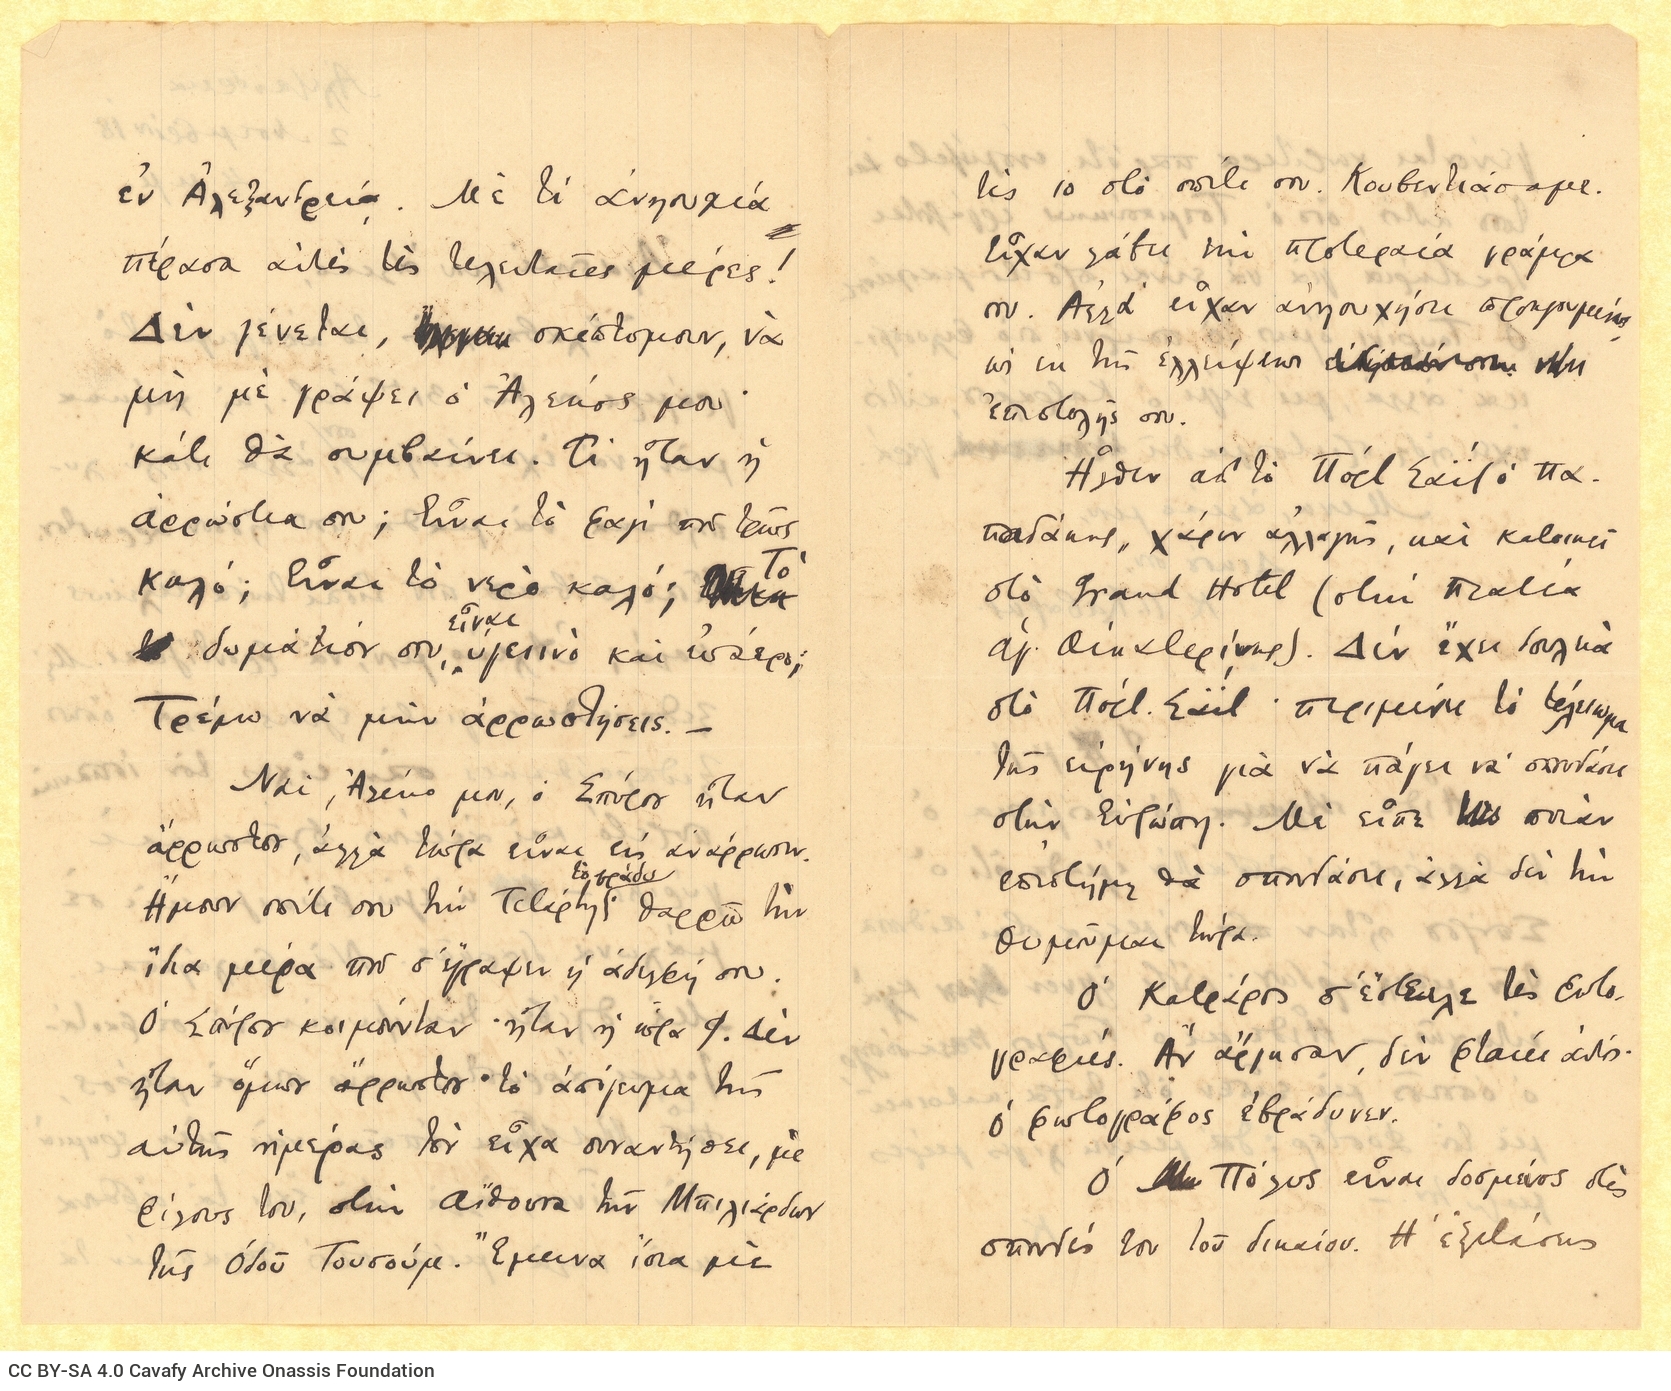 Handwritten letter by Cavafy to Alekos [Singopoulo] on all sides of a bifolio. Advice to the recipient regarding his healt